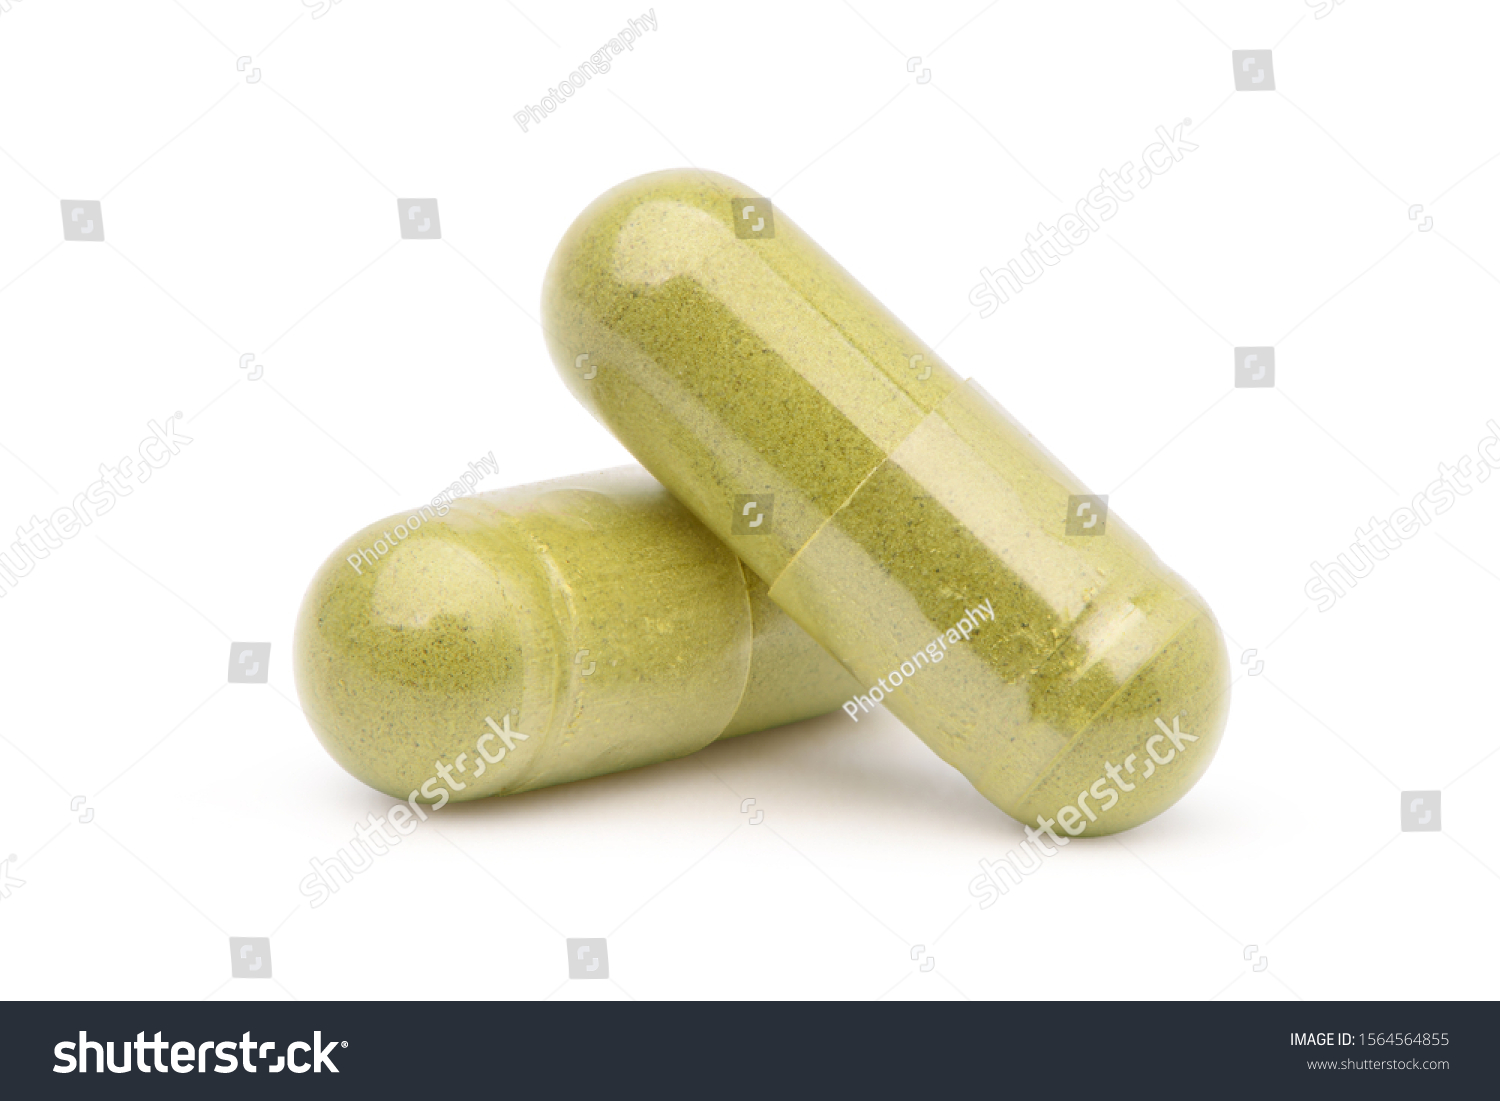 Close-up Two Herb powder capsules isolated on white background. Clipping path. #1564564855